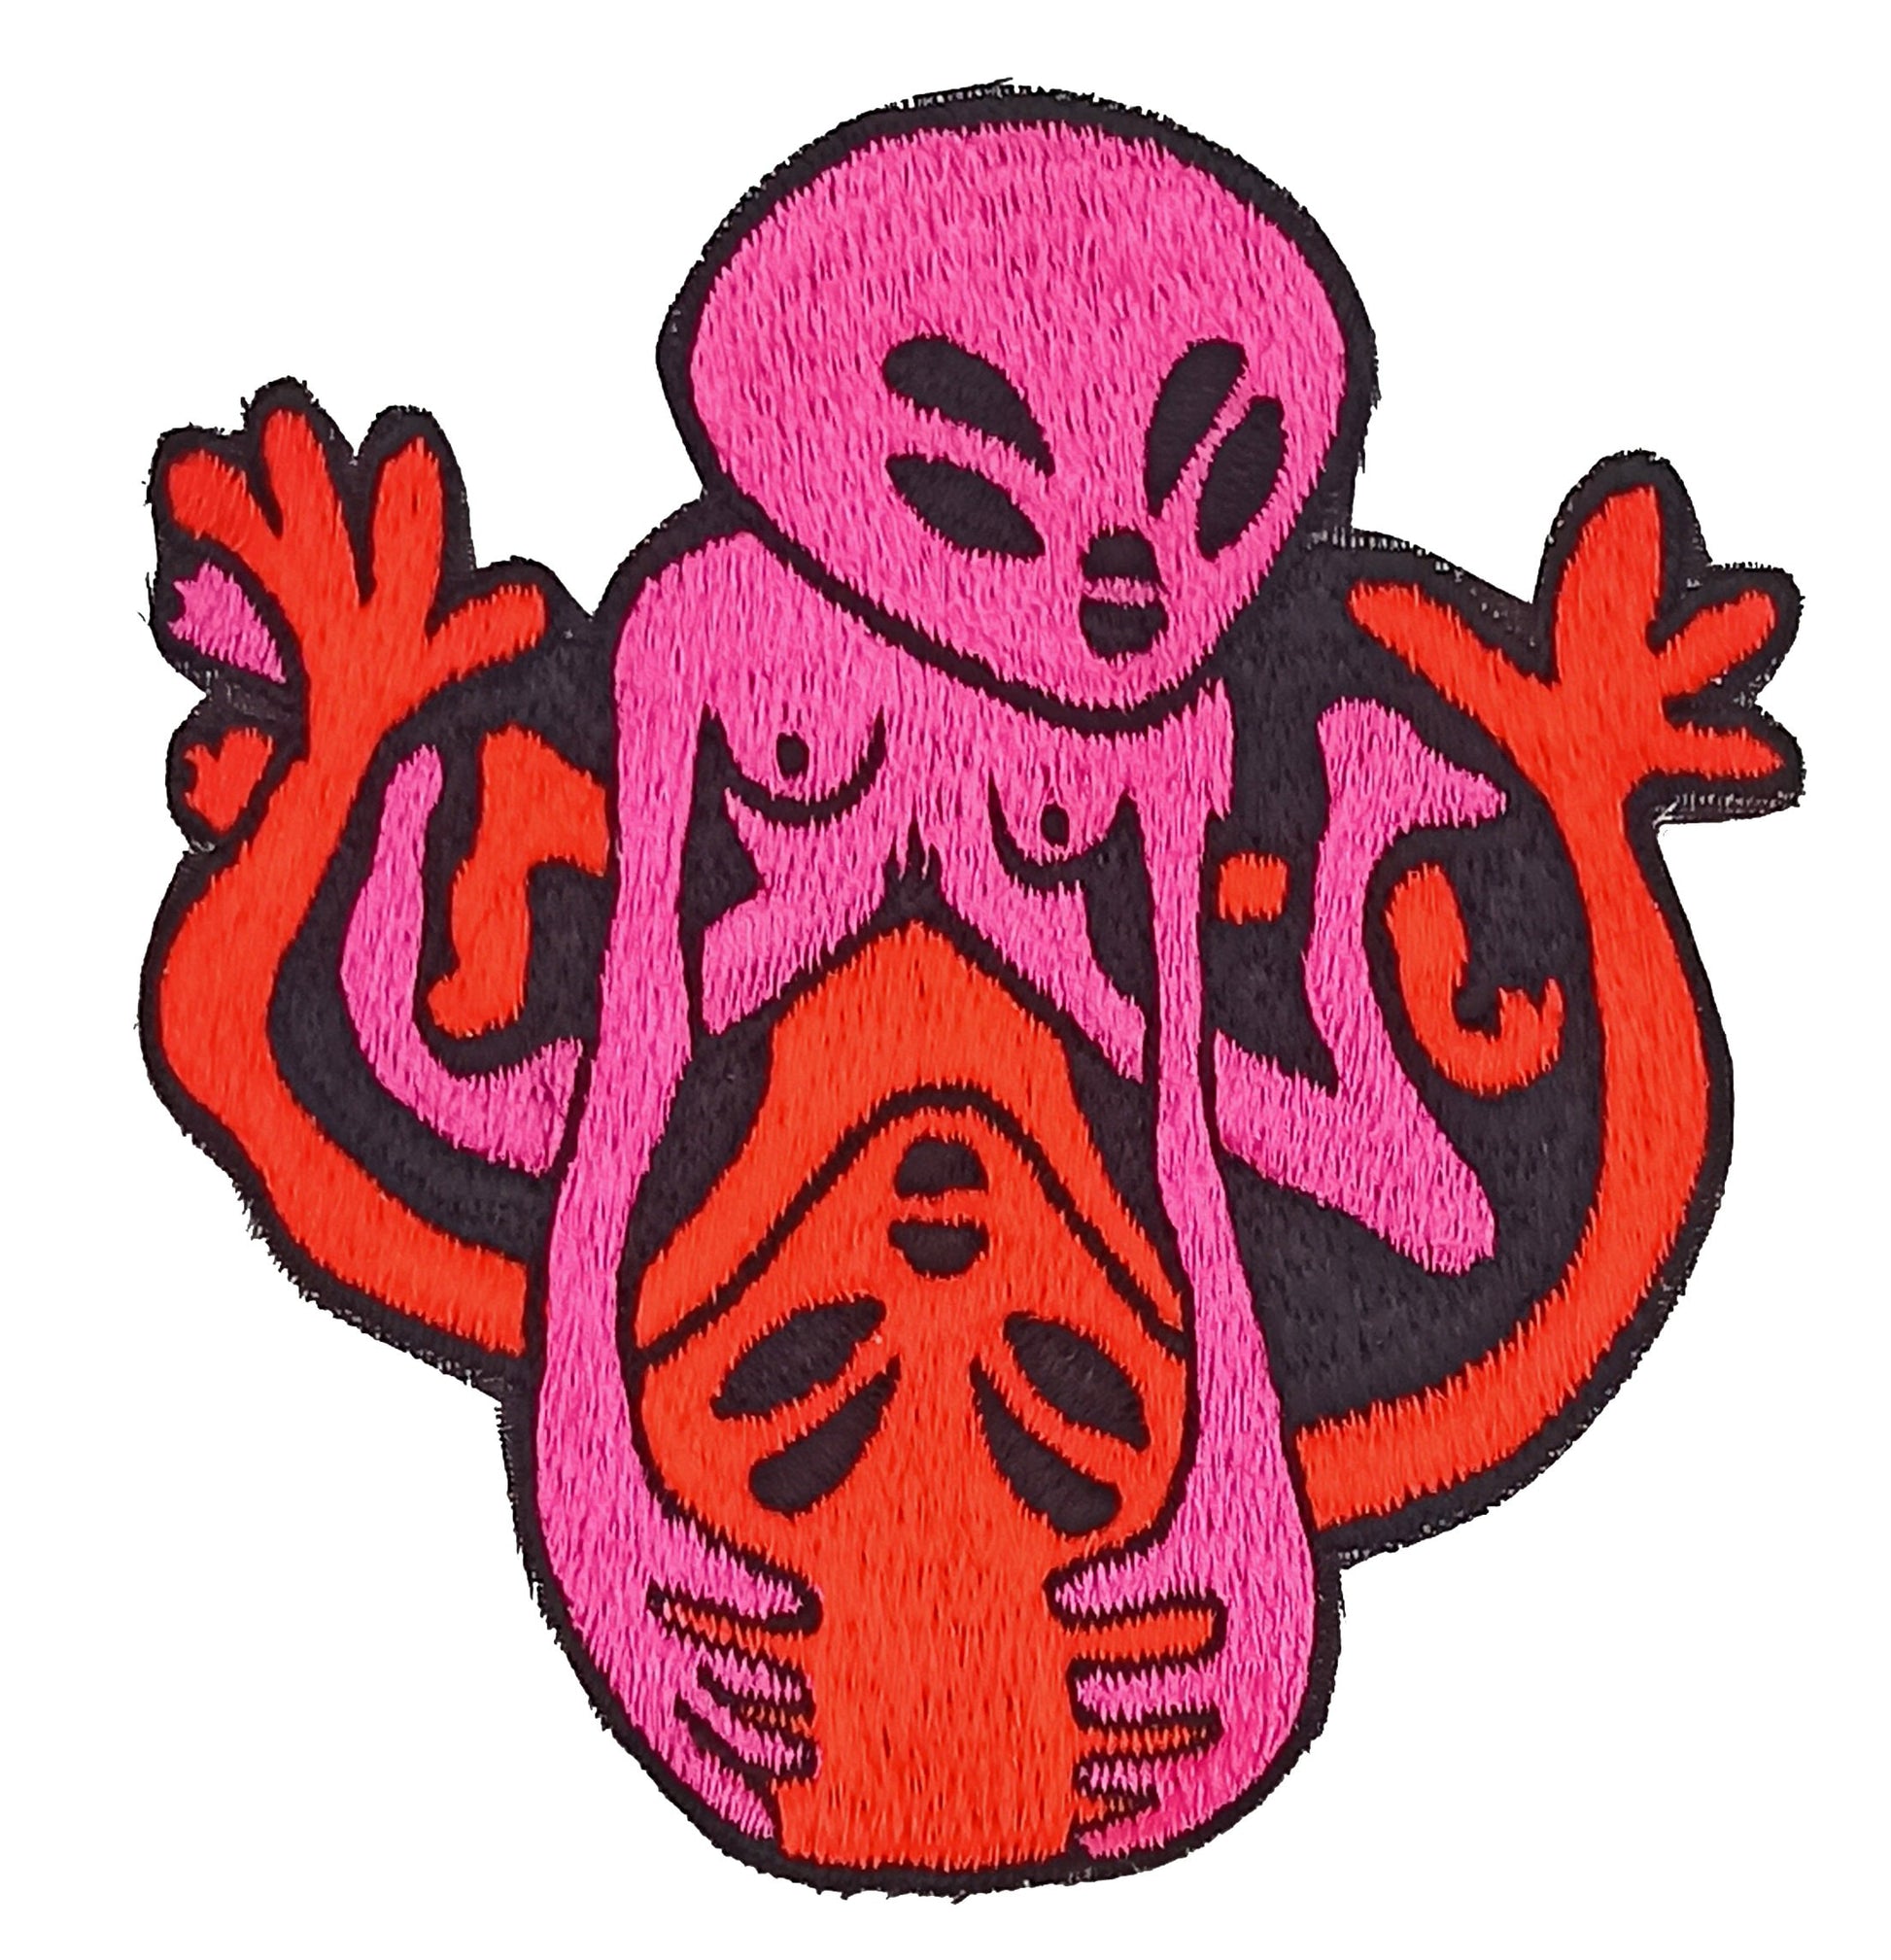 Alien Love Patch blacklight glowing embroidery - 3.5 inches - UV shining psychedelic Psytrance Extraterrestrial Sex is Fun Goa Trance Party